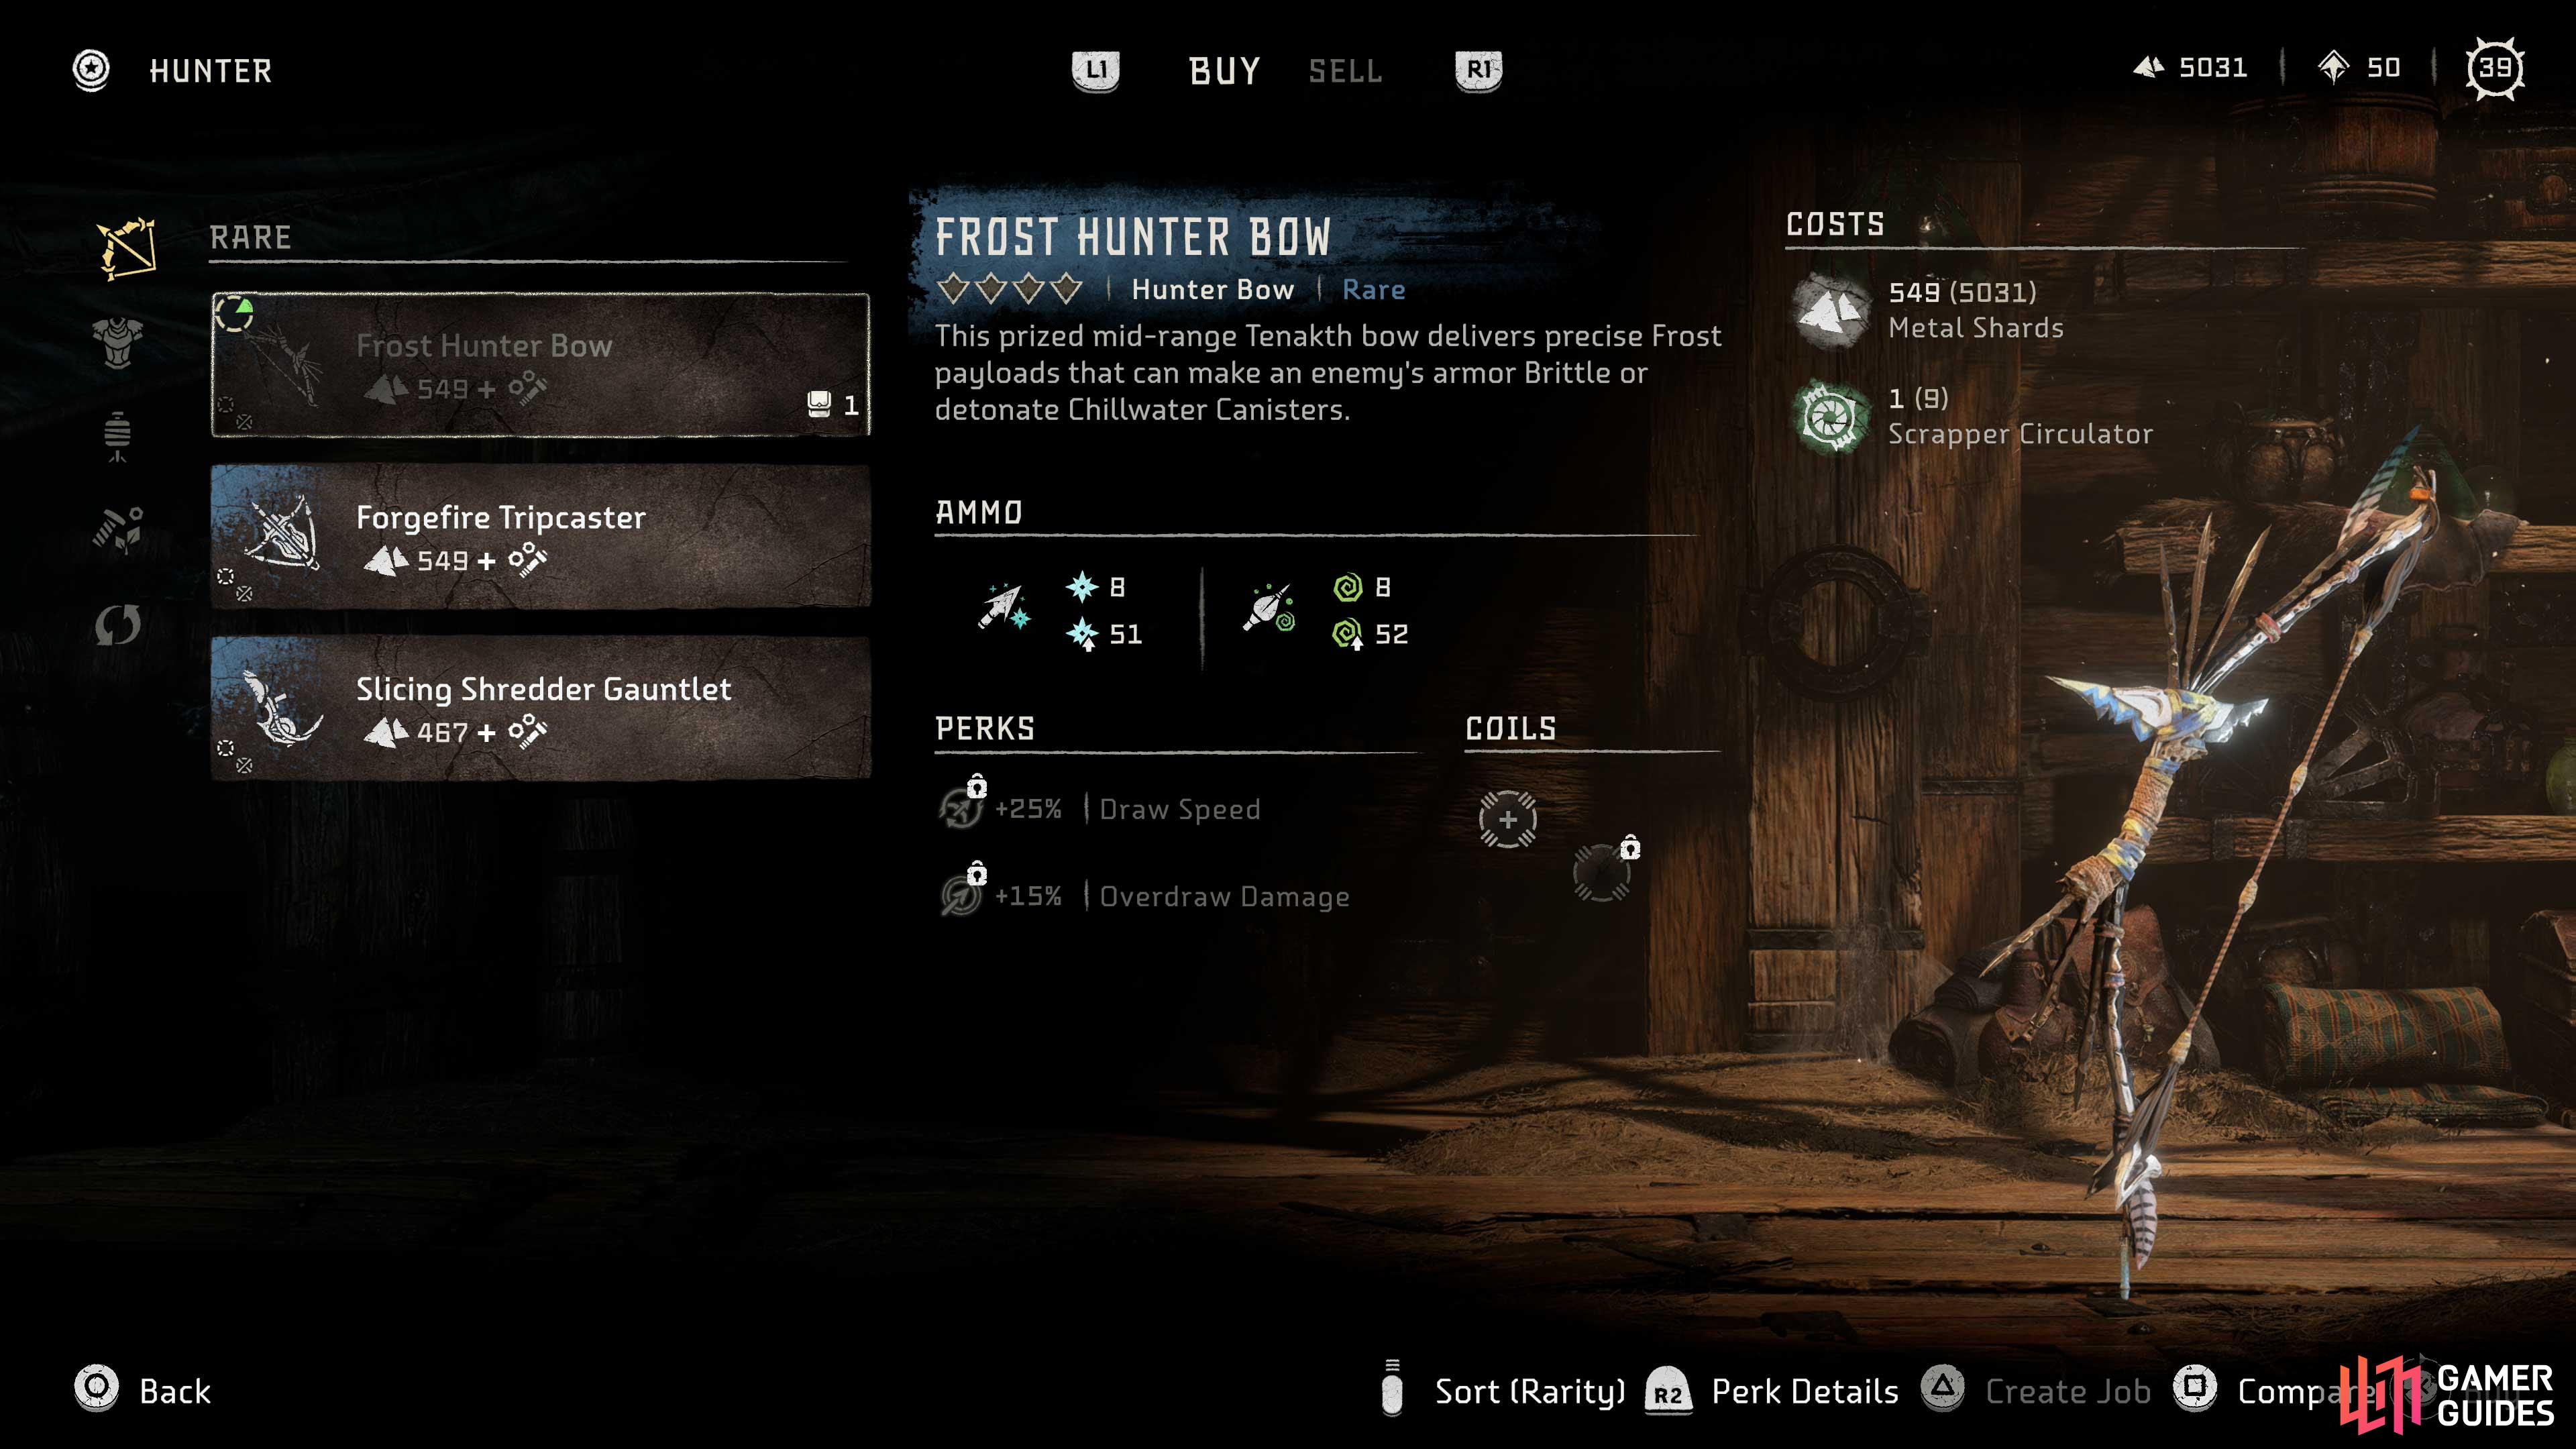 You can buy the Frost Hunter Bow from the Hunter in Plainsong, as well as from a Hunter east of LATOPOLIS.